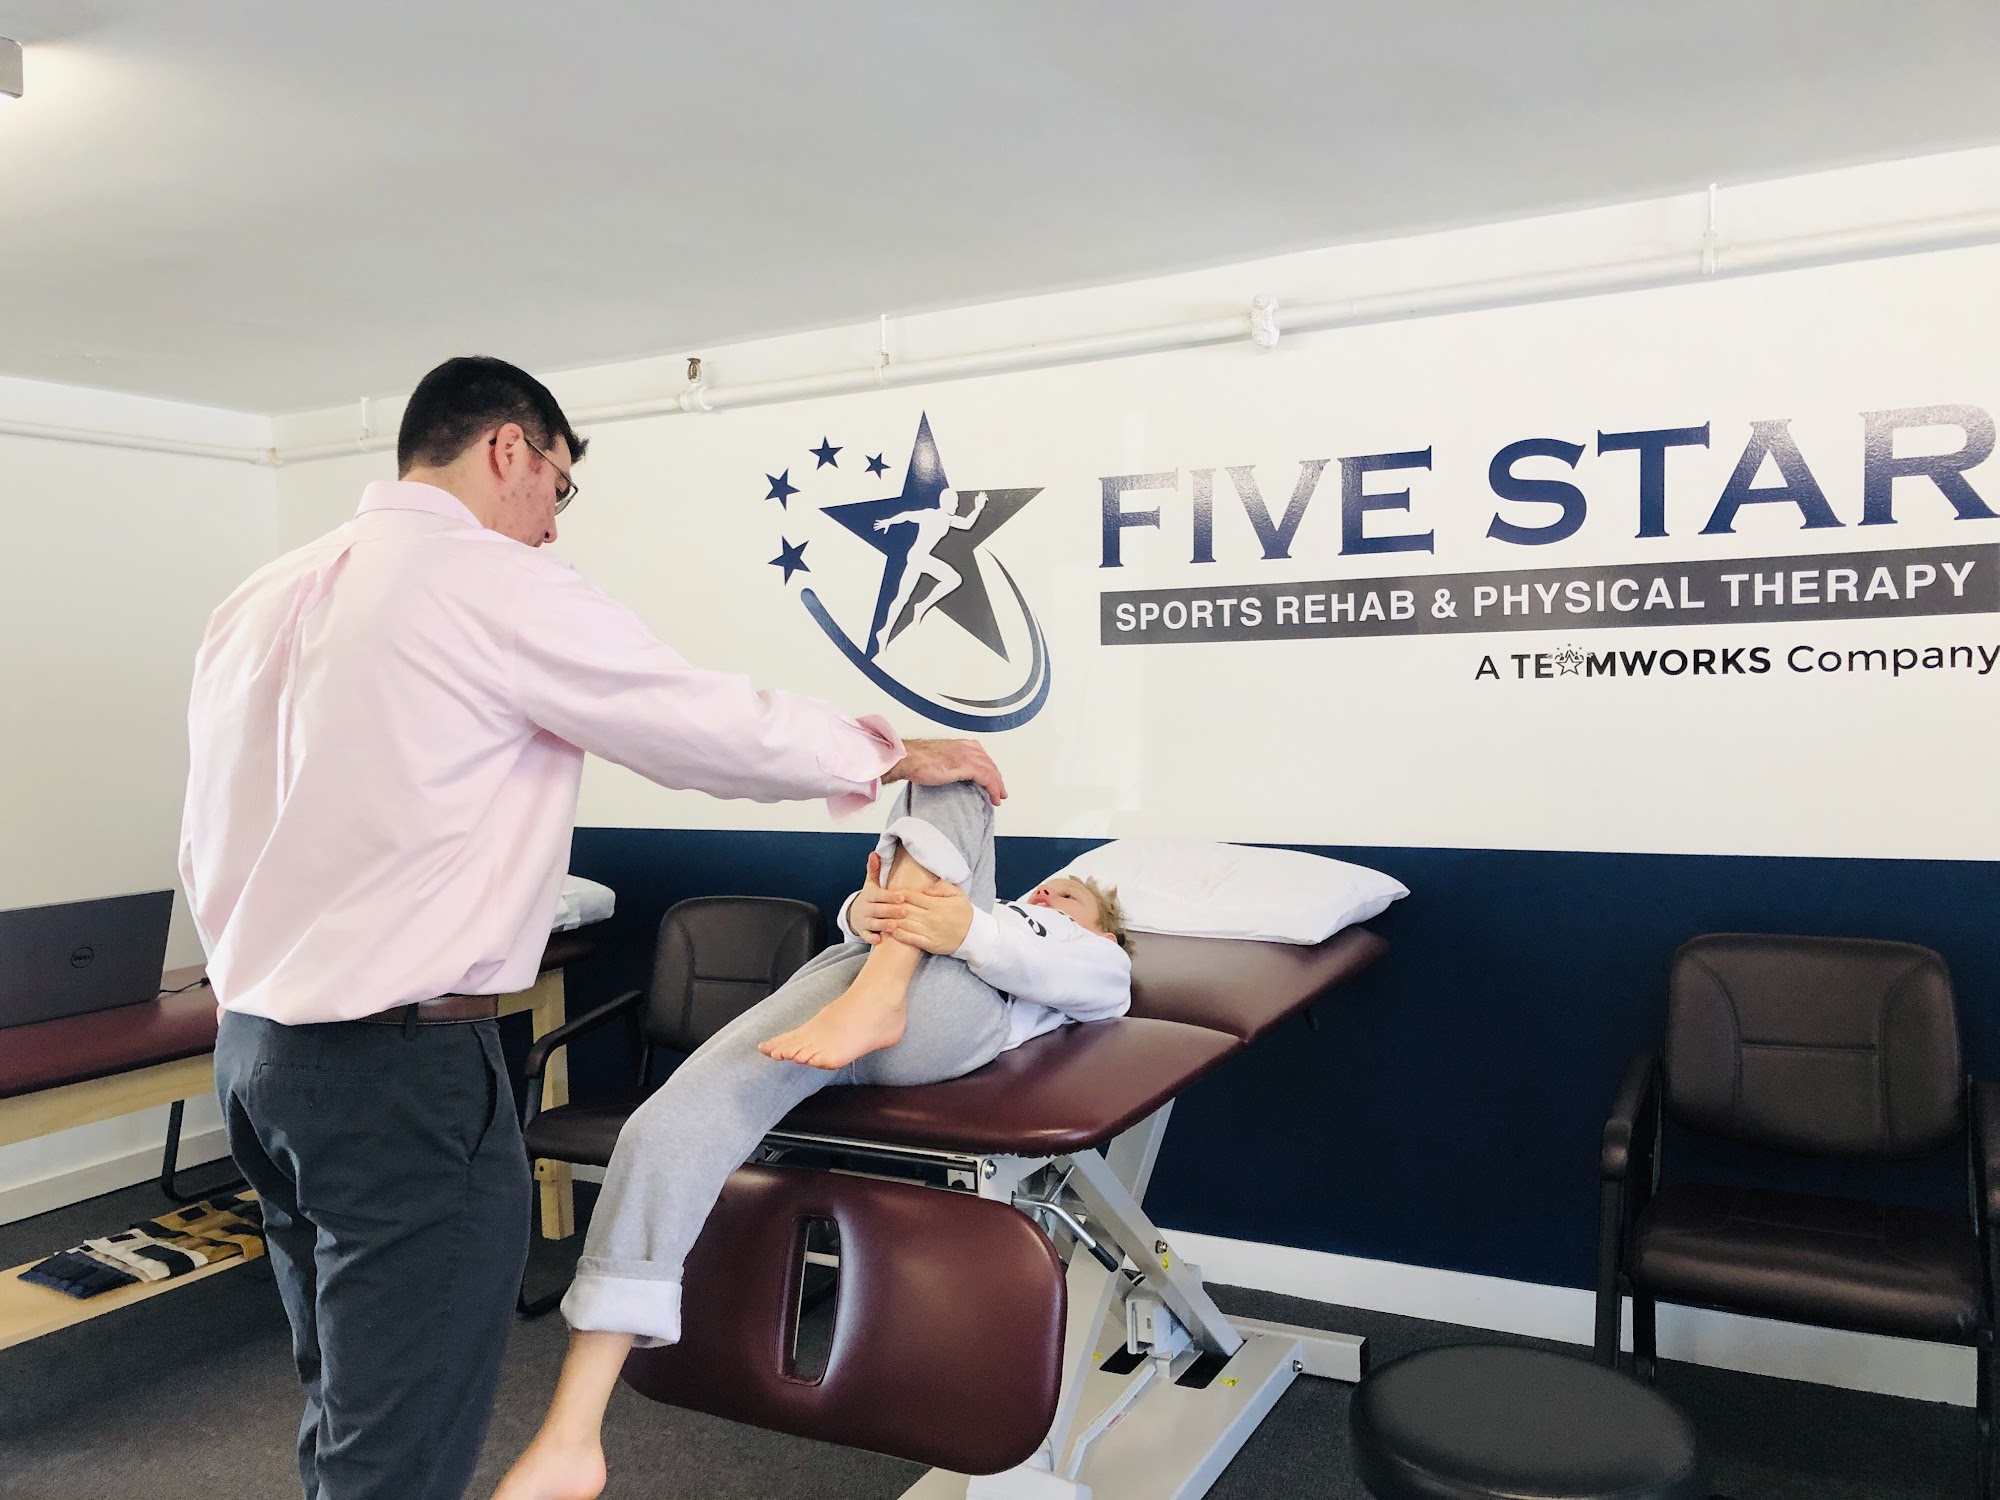 Five Star Sports Rehab & Physical Therapy